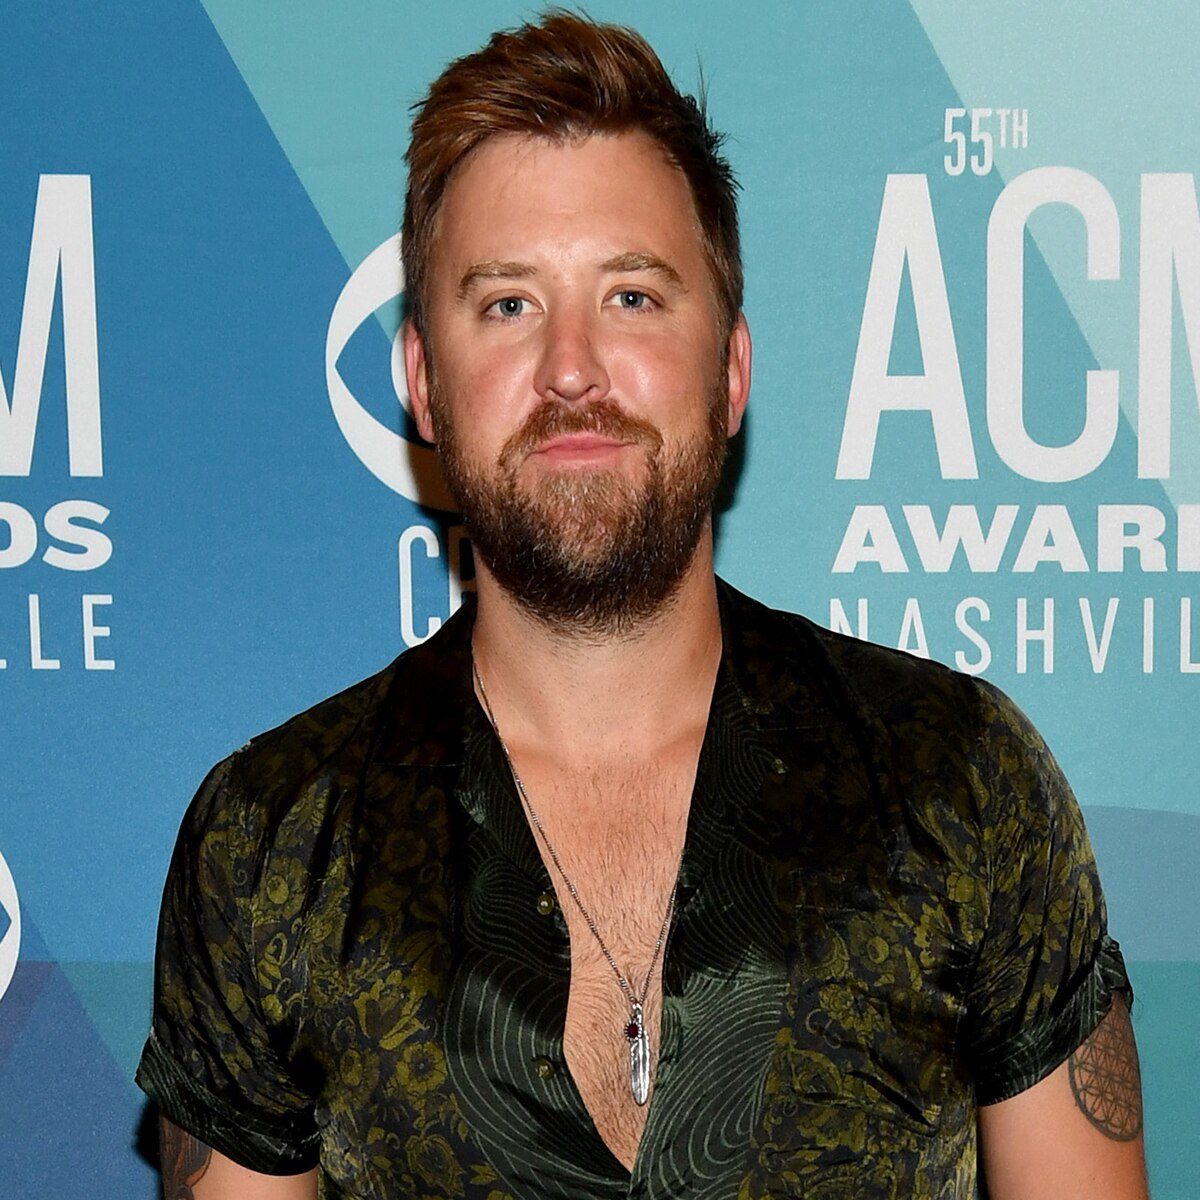 Charles Kelley of Lady A, ACM Awards Red Carpet